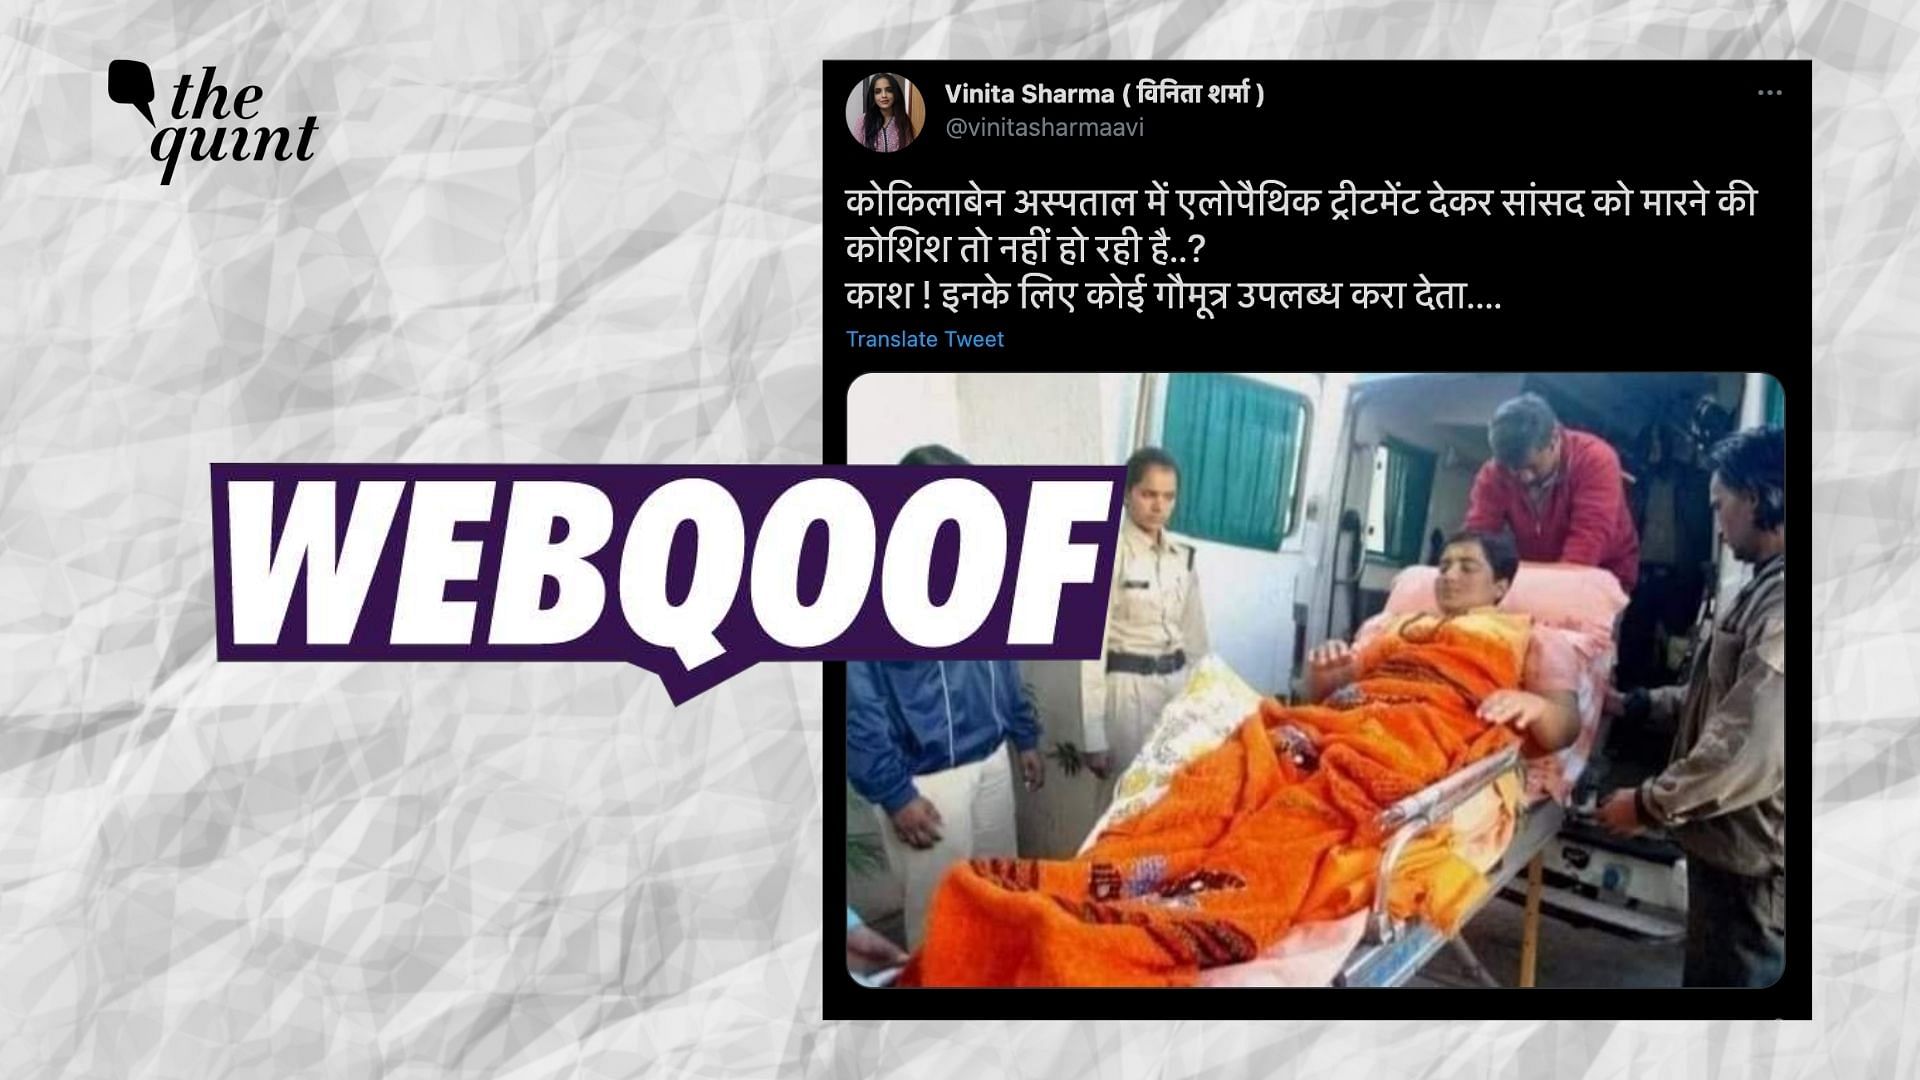 An old photograph of Sadhvi Pragya being carried into an ambulance is getting shared with false claims.